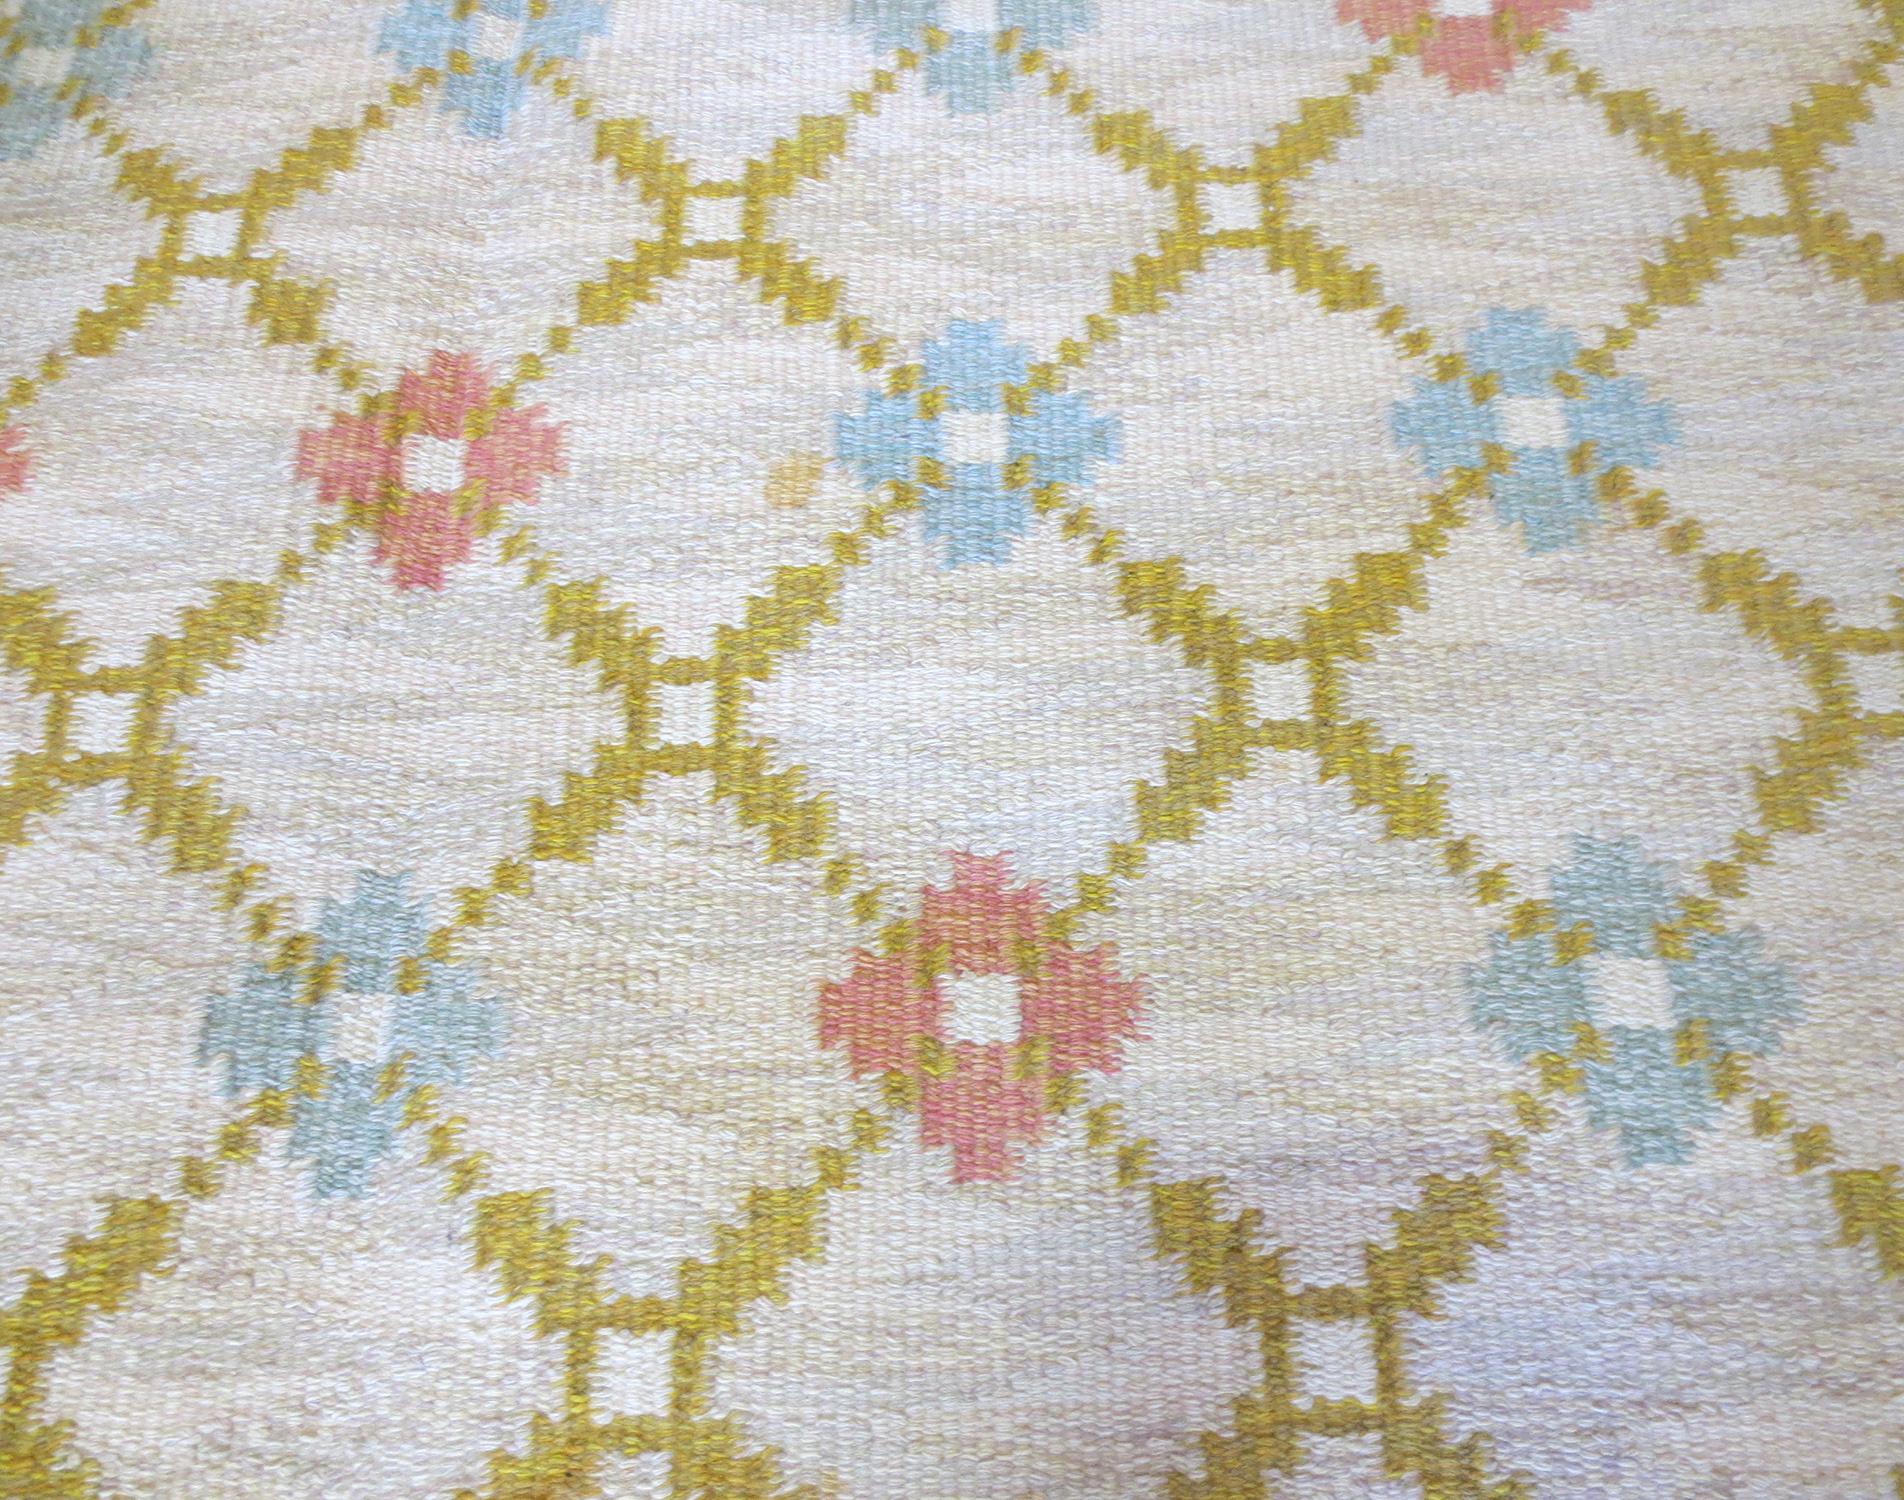 This is a vintage Scandinavian Kilim from the mid-20th century. It features dainty geometric florals rendered in a lattice work pattern of soft blues, pinks, and yellow greens which is set on an ivory background. This Minimalist yet beautiful